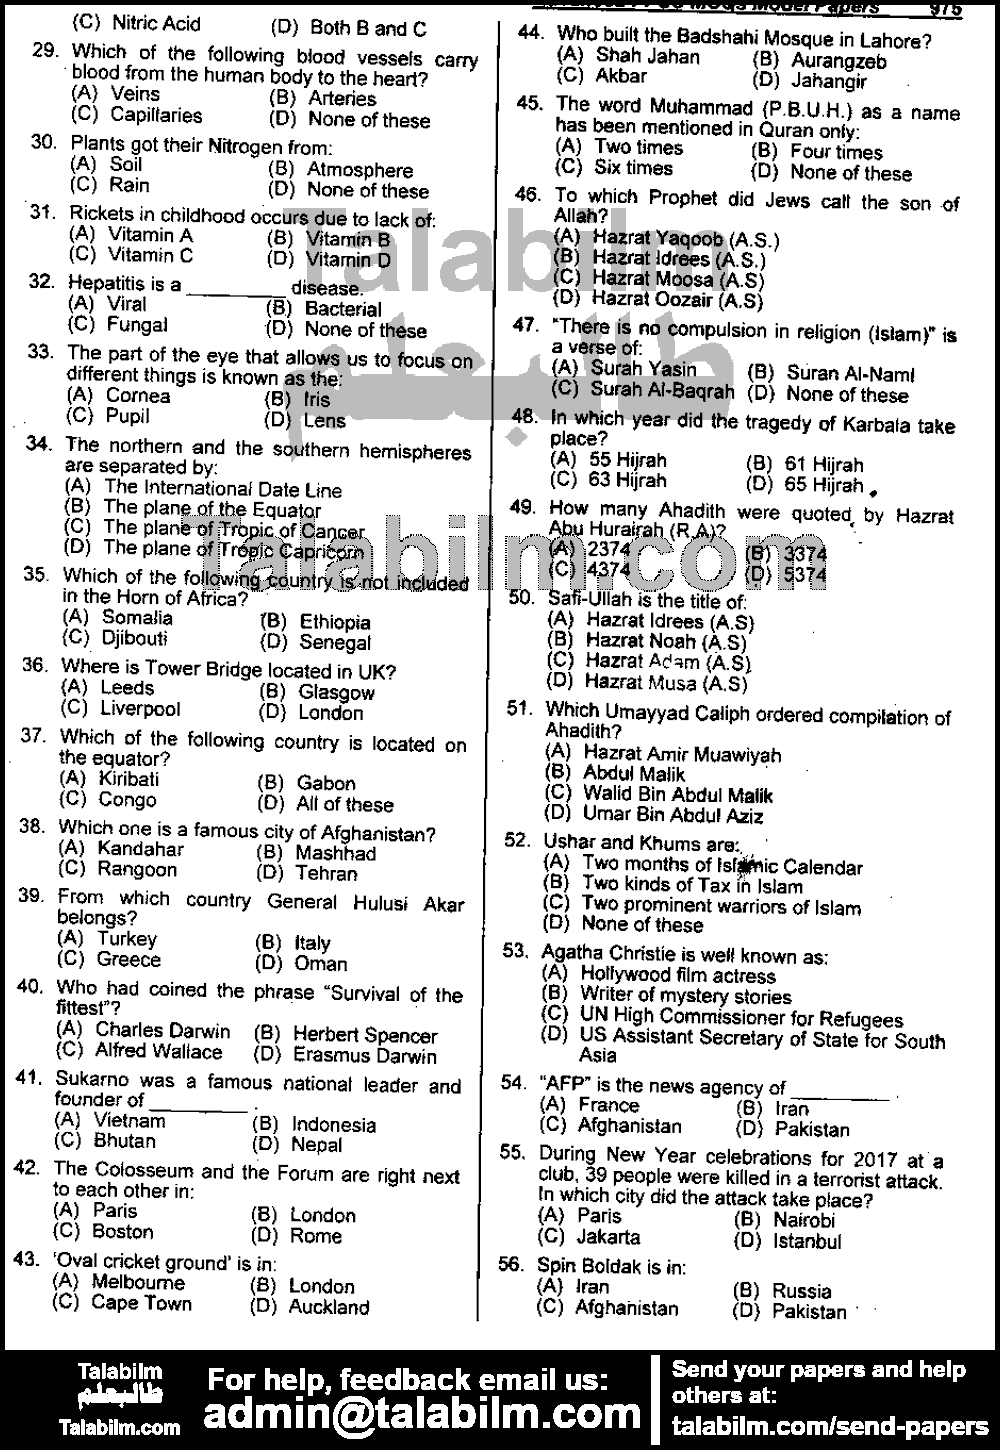 Gender Monitoring Specialist 0 past paper for 2018 Page No. 2